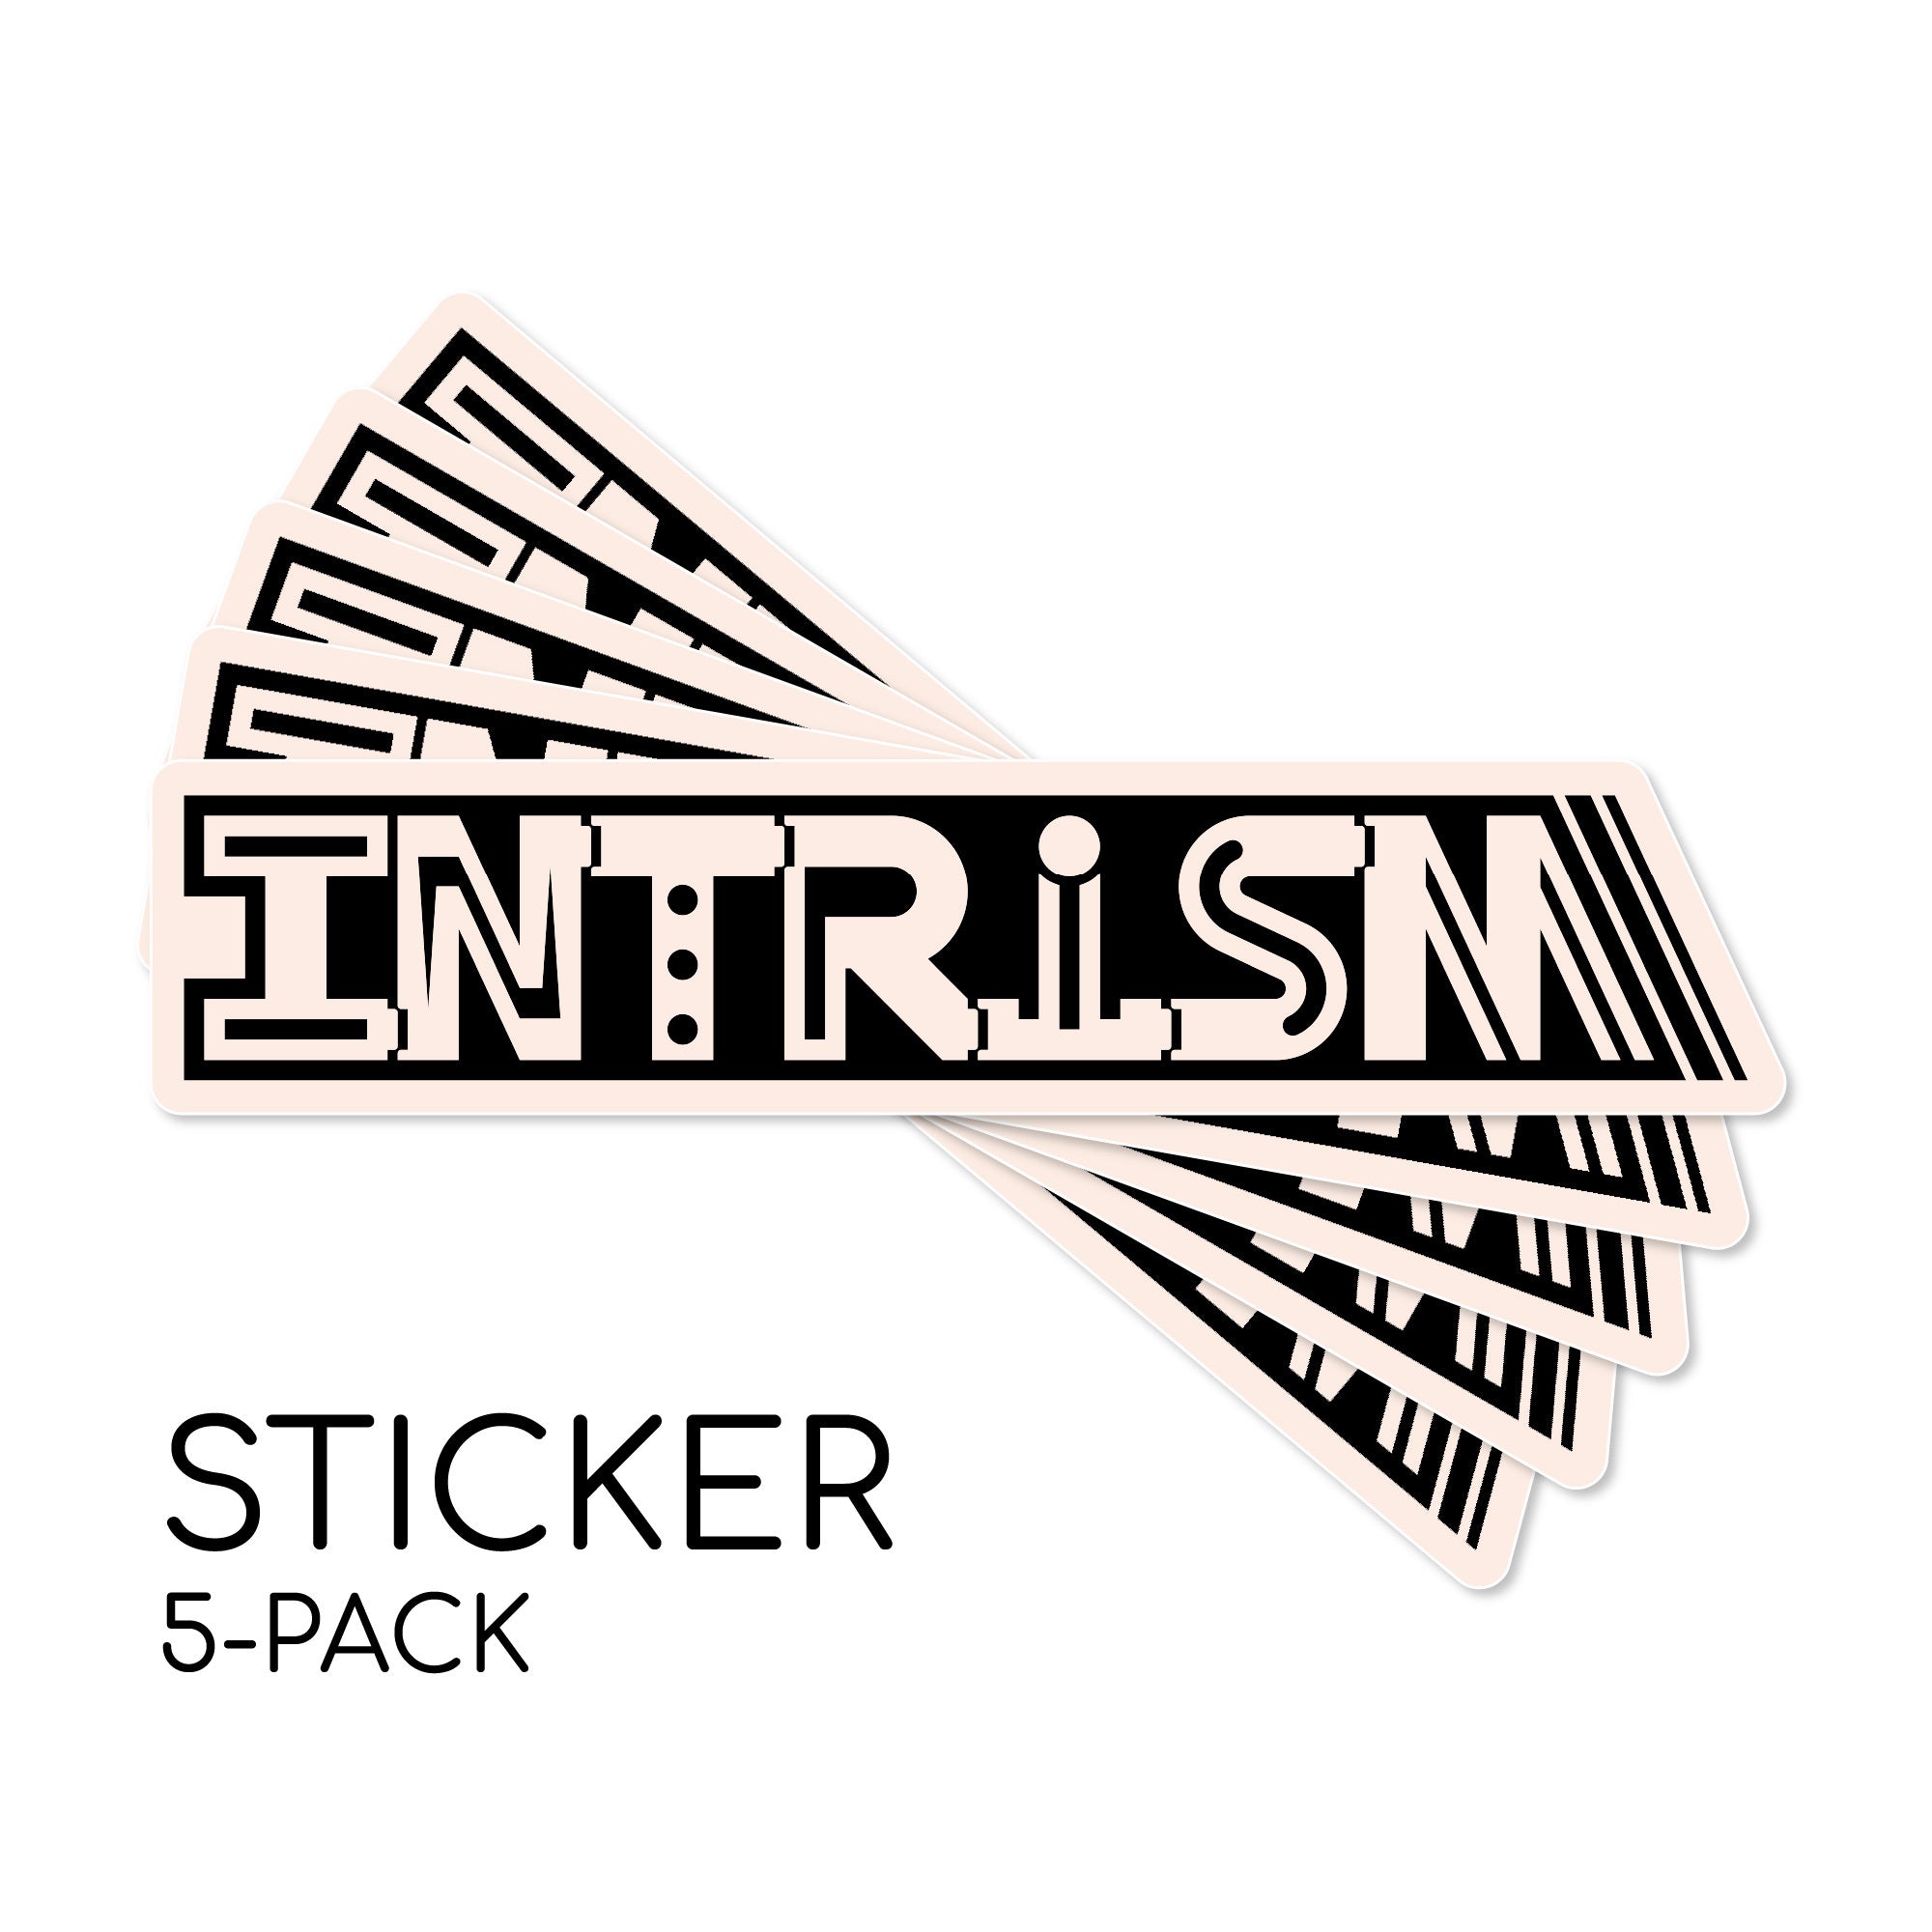 5 Pack of Intrism Stickers